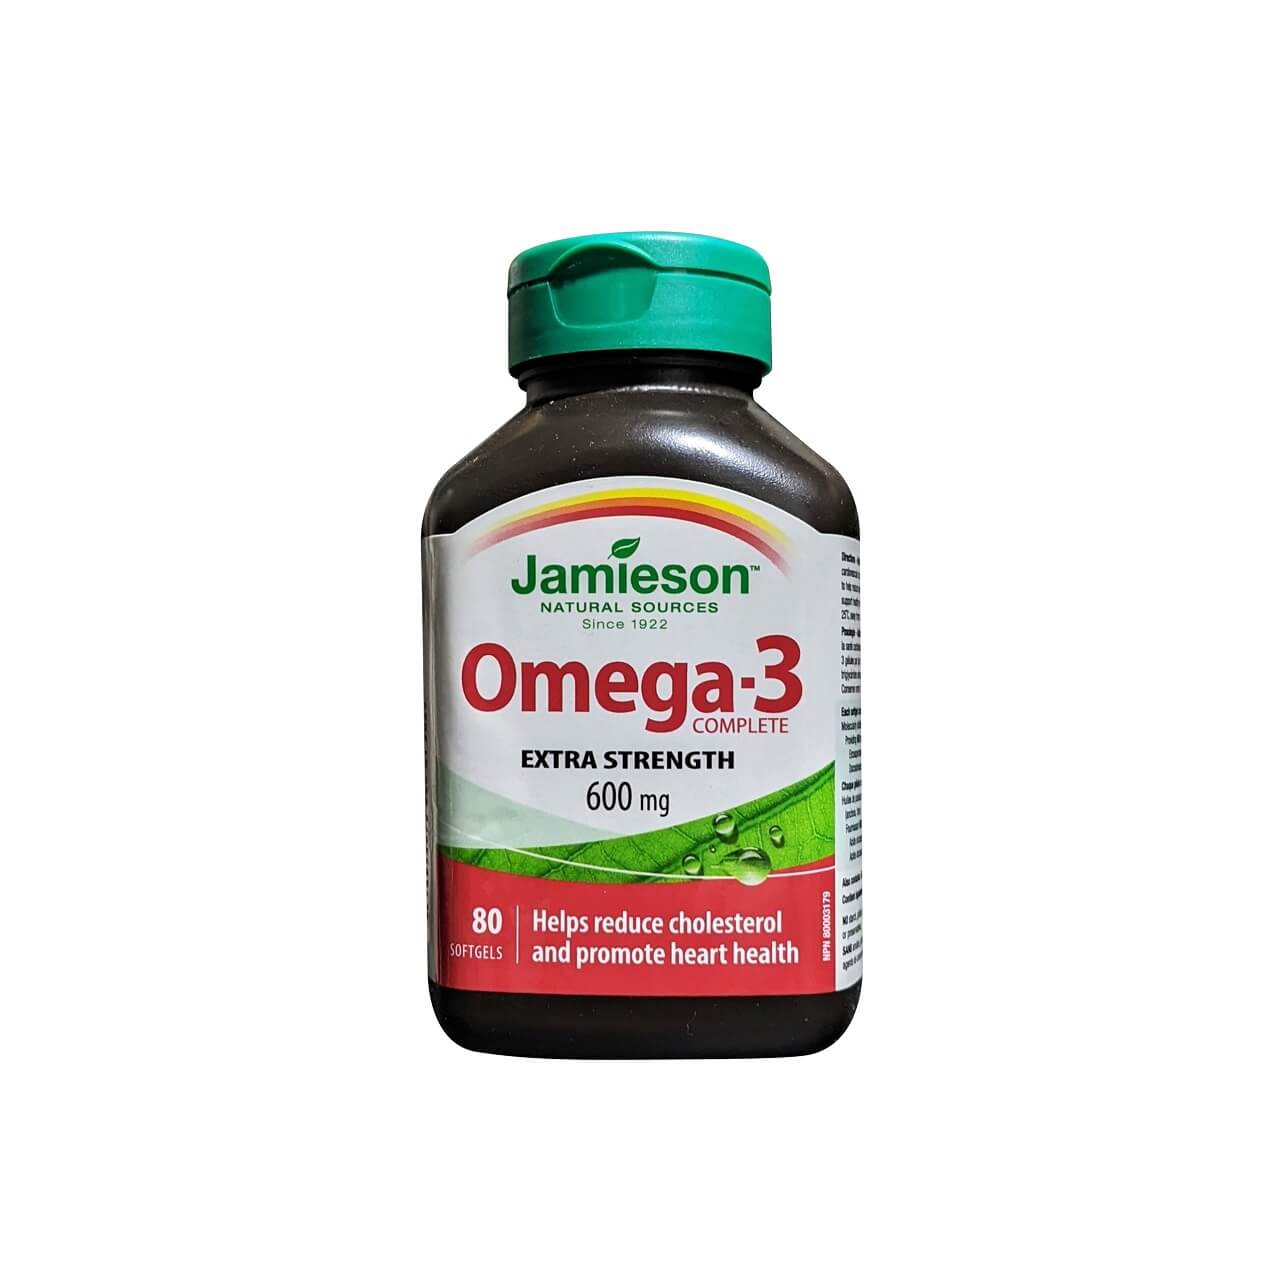 Product label for Jamieson Omega-3 Complete Extra Strength 600 mg (80 softgels) in English